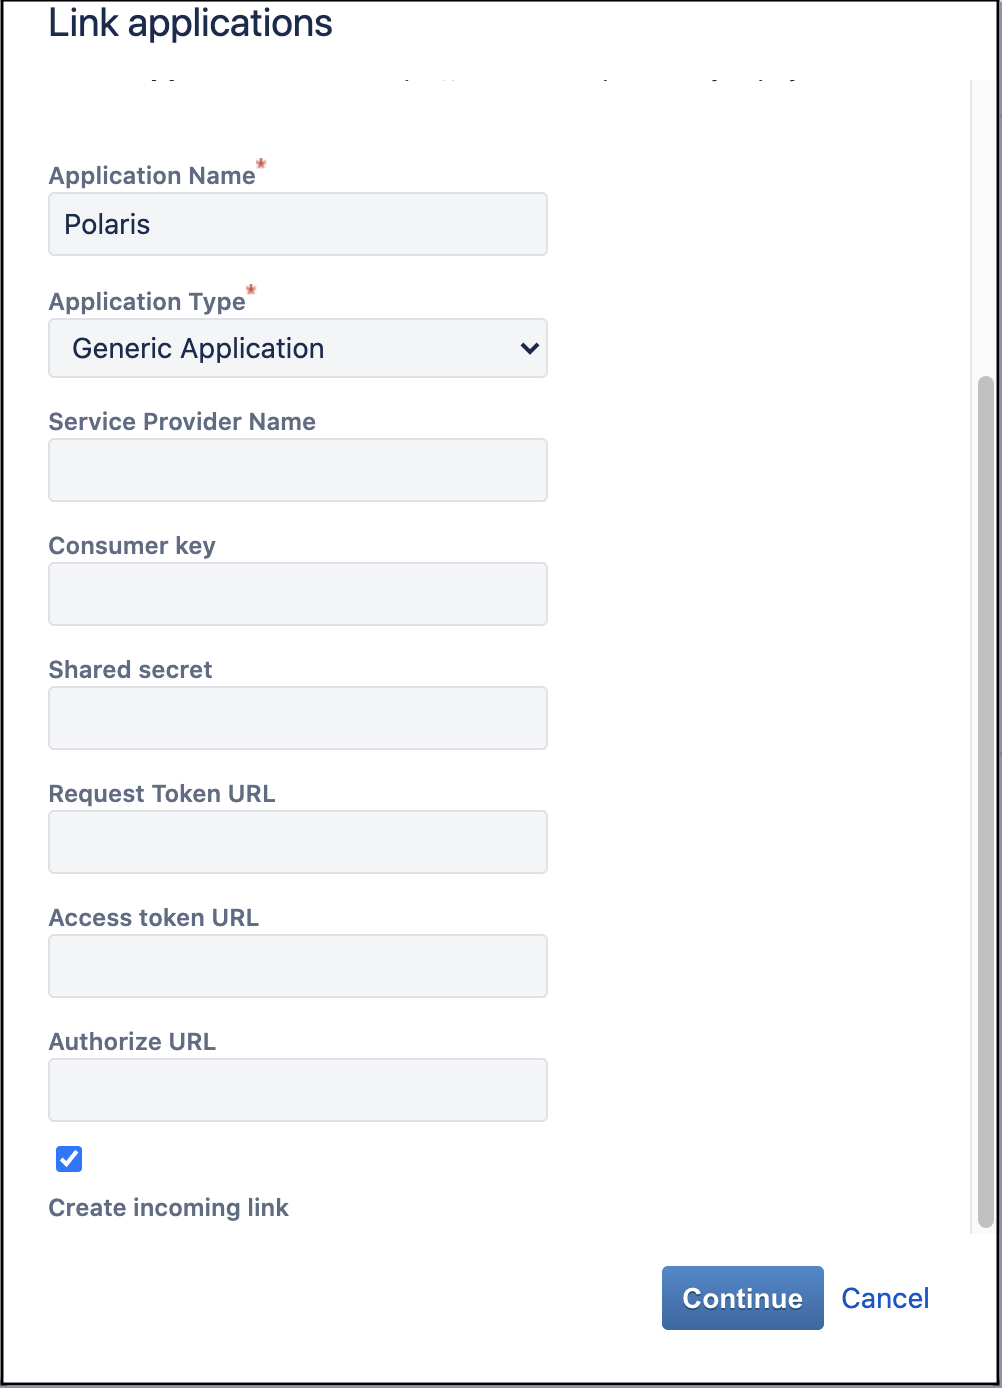 A screenshot that shows the first pop-up form in Jira.